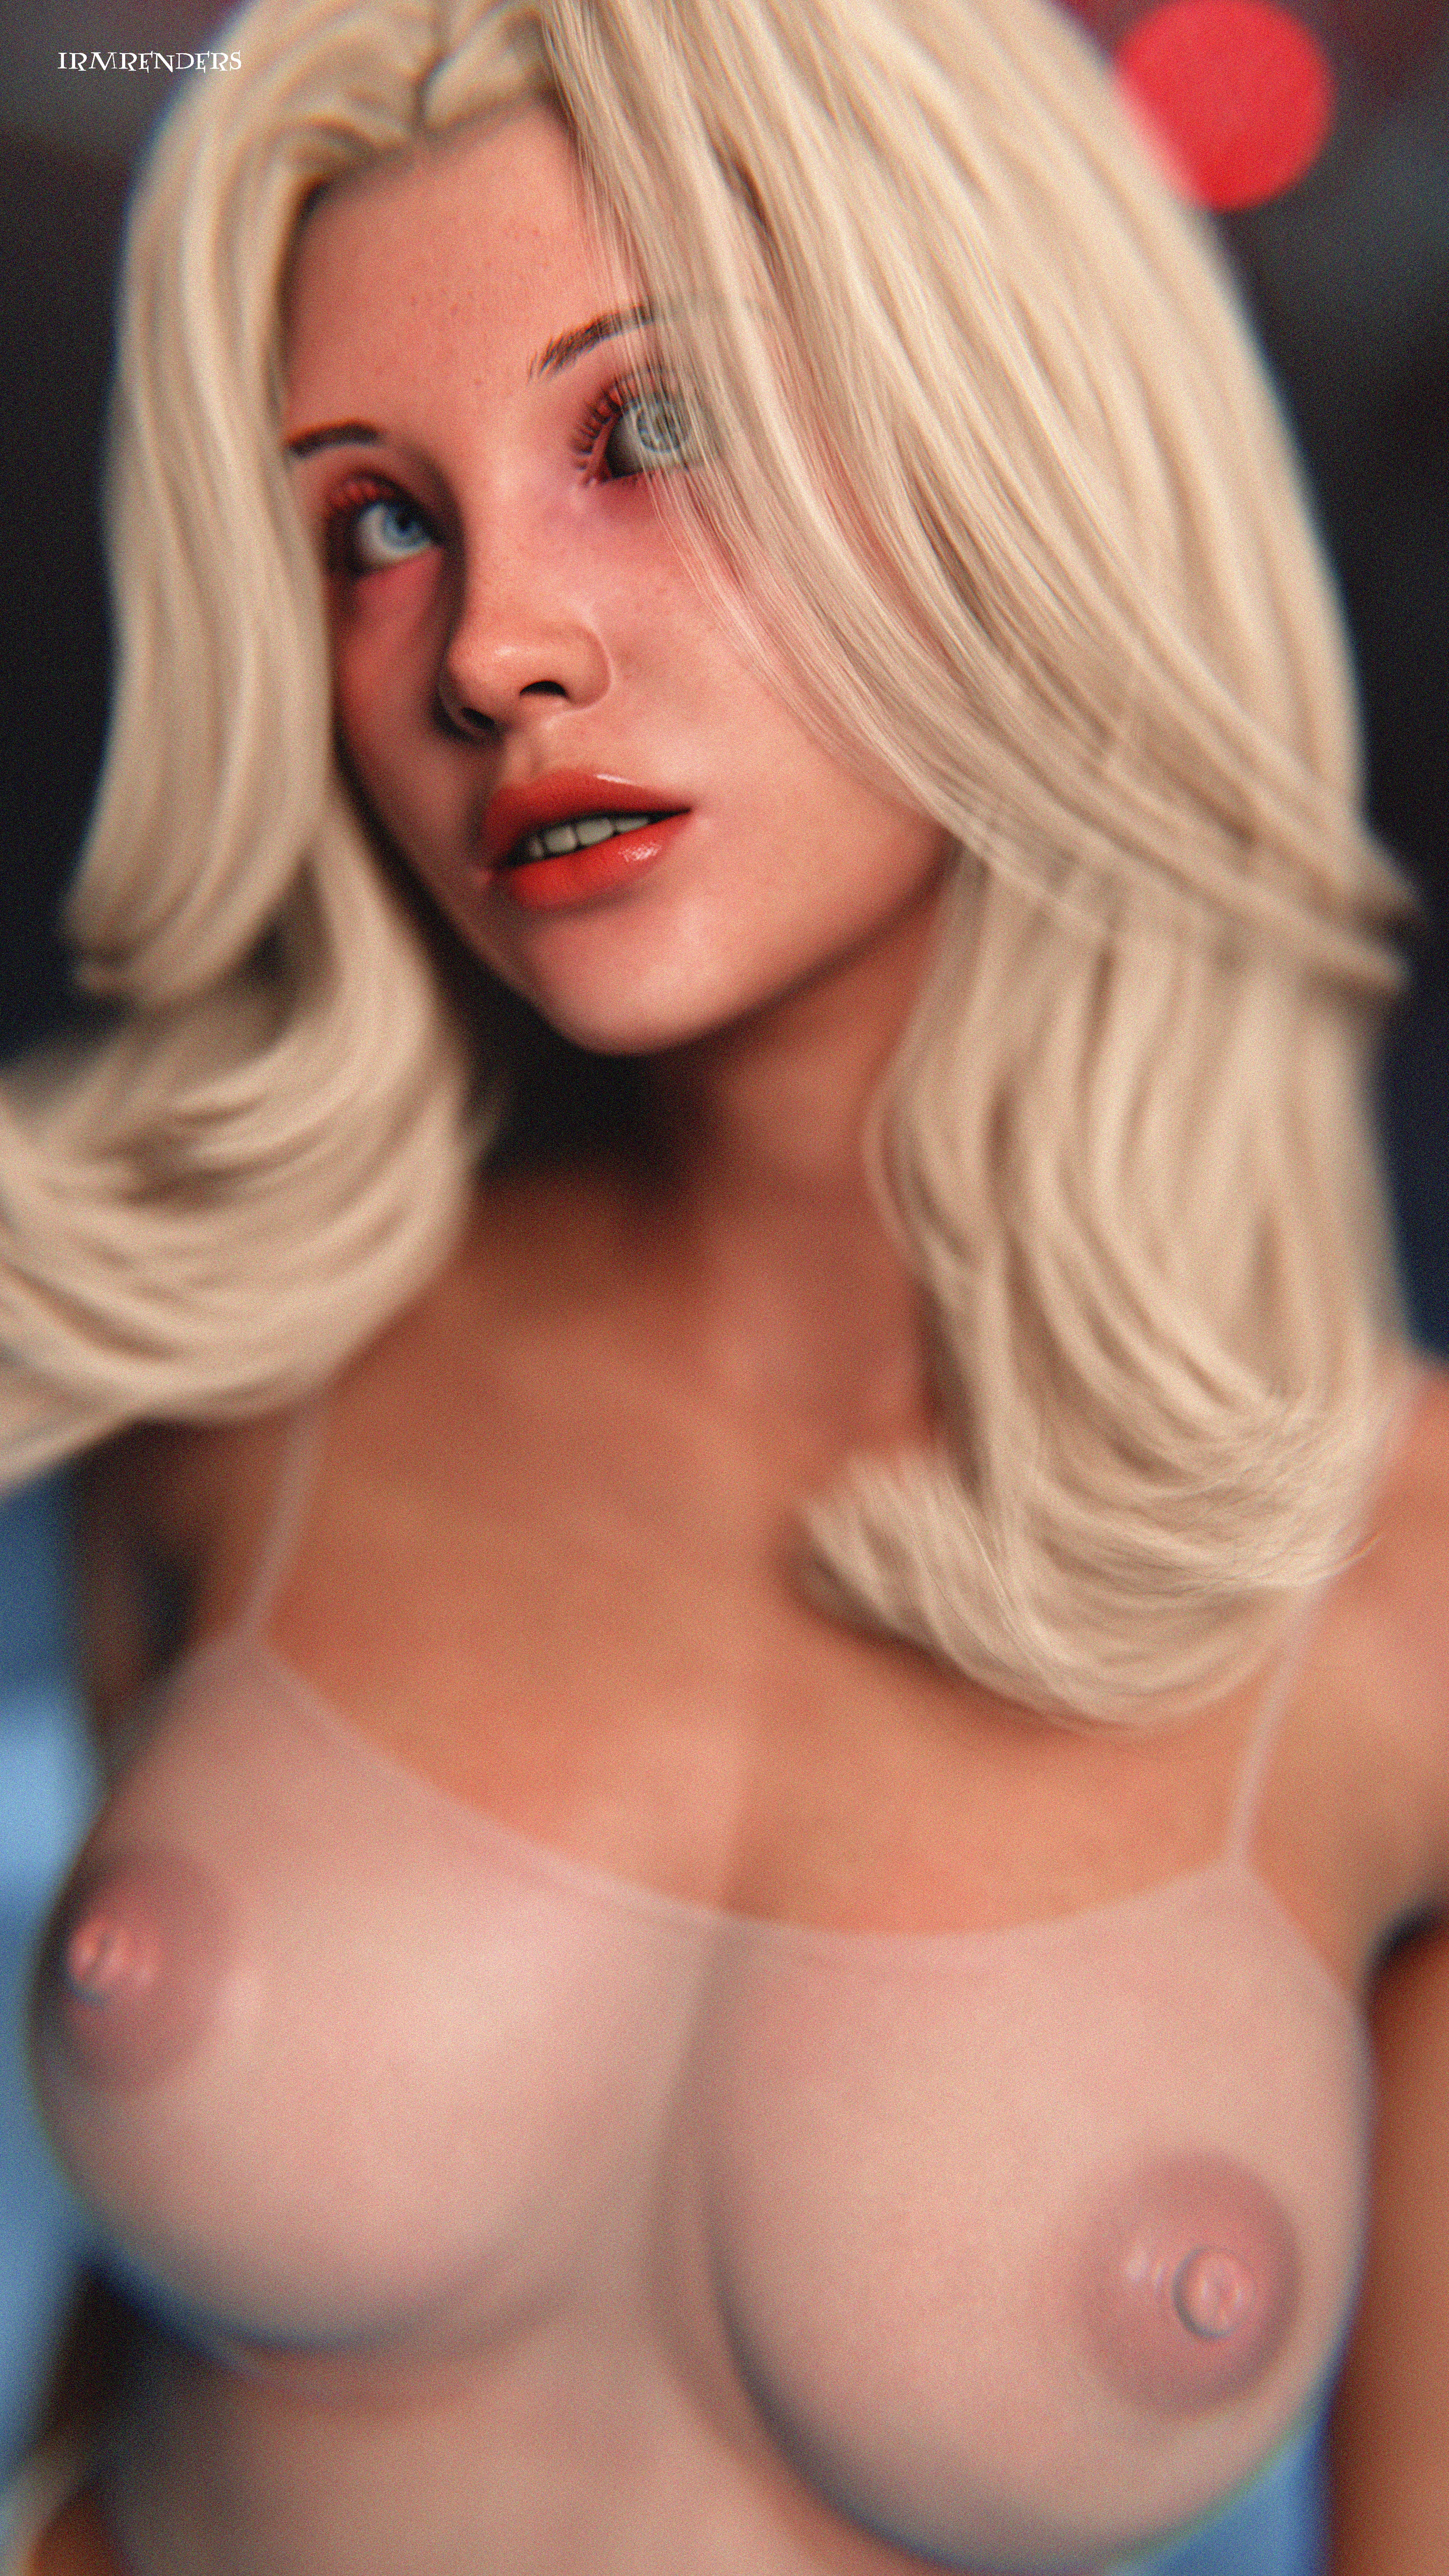 Your Cute Blondes - 4K Collection https://www.patreon.com/IRMRenders